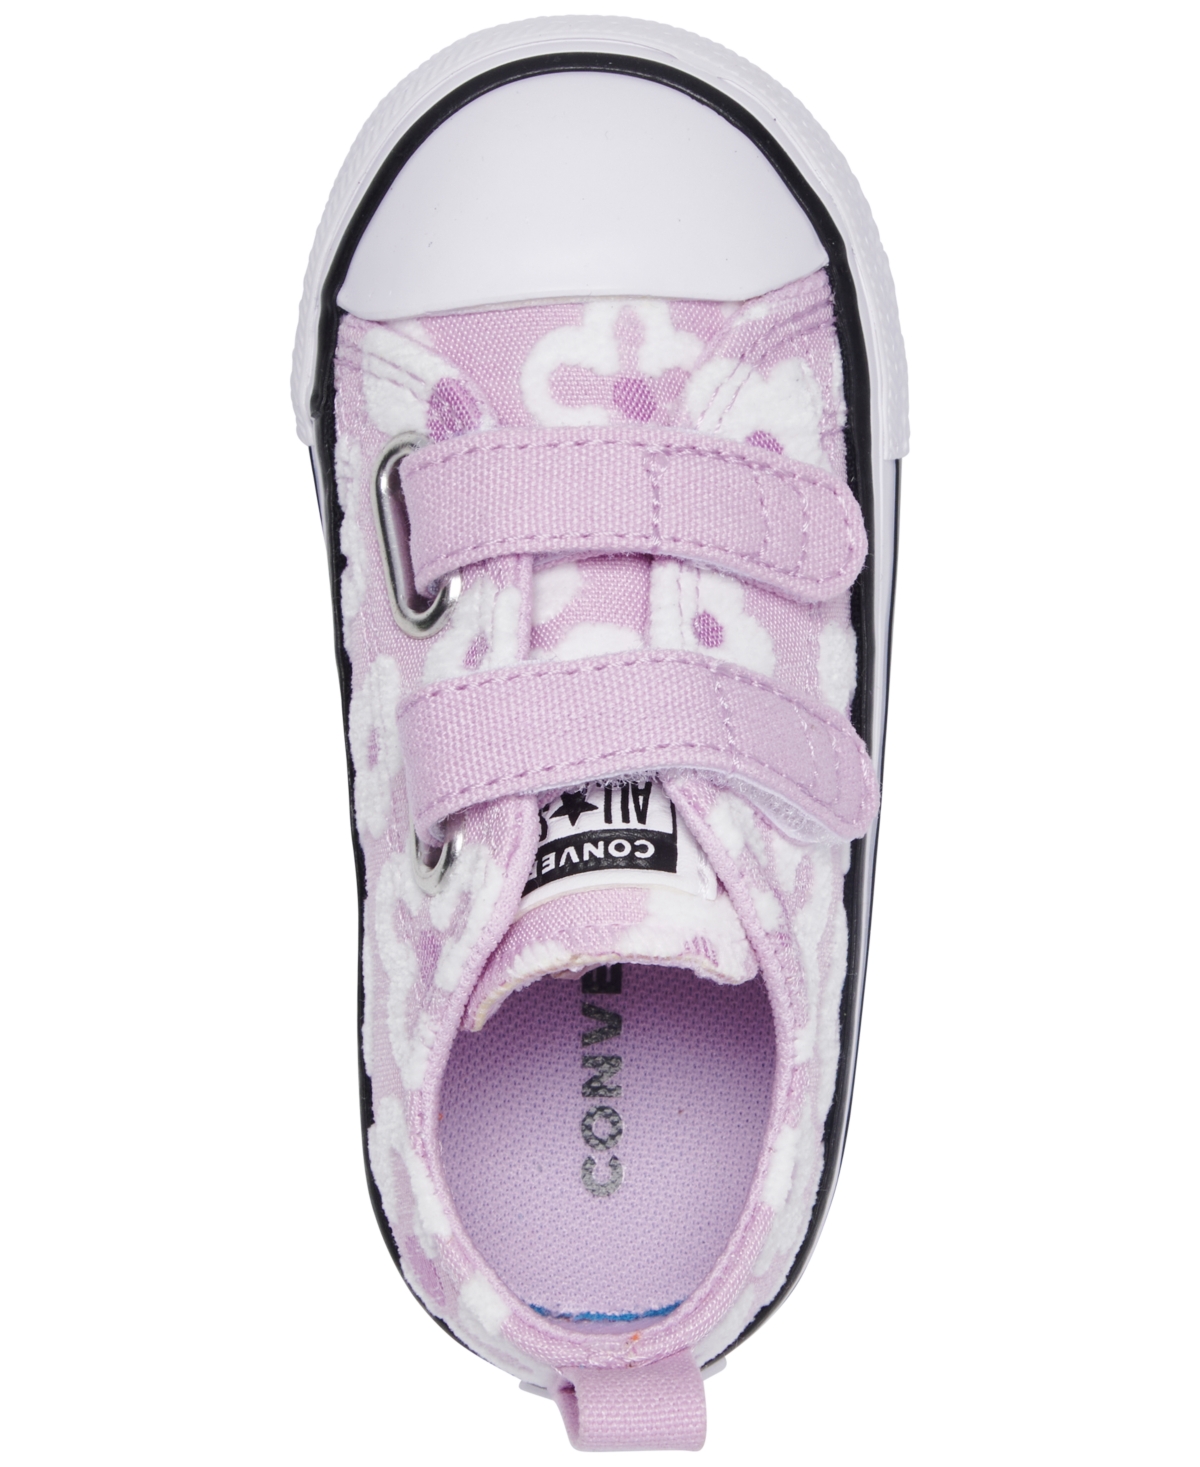 Shop Converse Toddler Girls Chuck Taylor All Star 2v Lo Floral Fastening Strap Casual Sneakers From Finish Line In Stardust Lilac